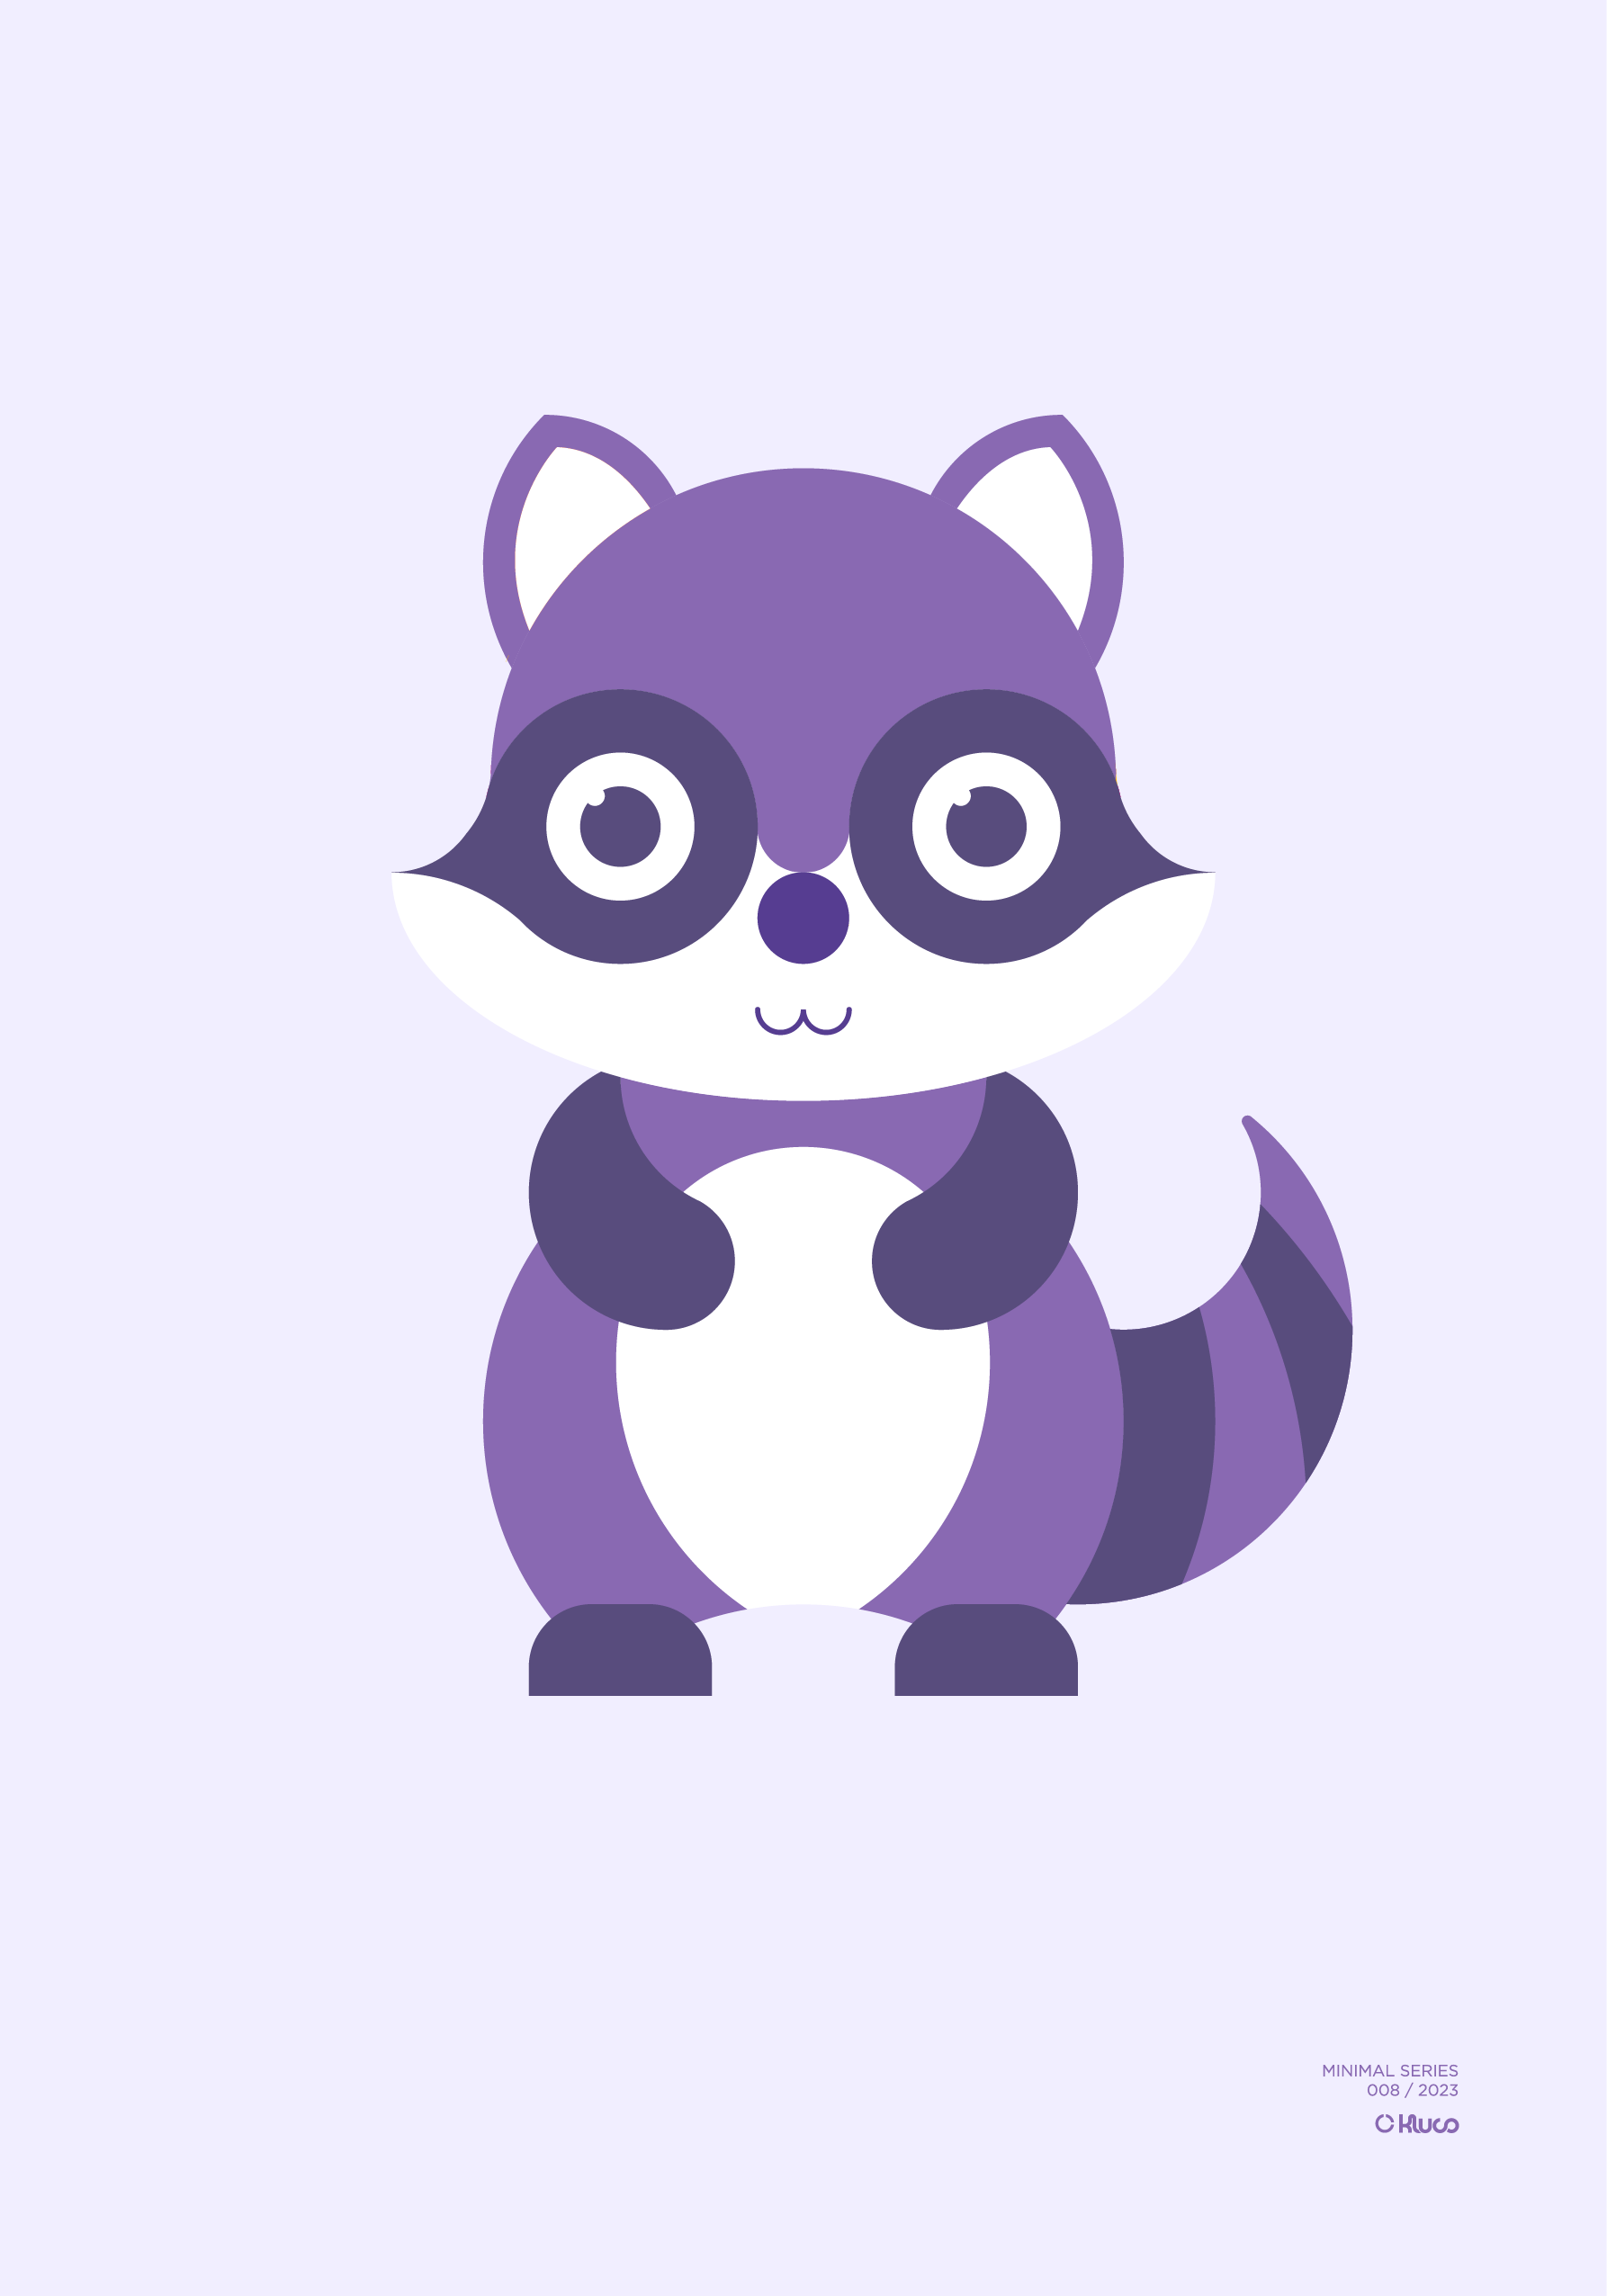 Minimalist-style poster of a raccoon